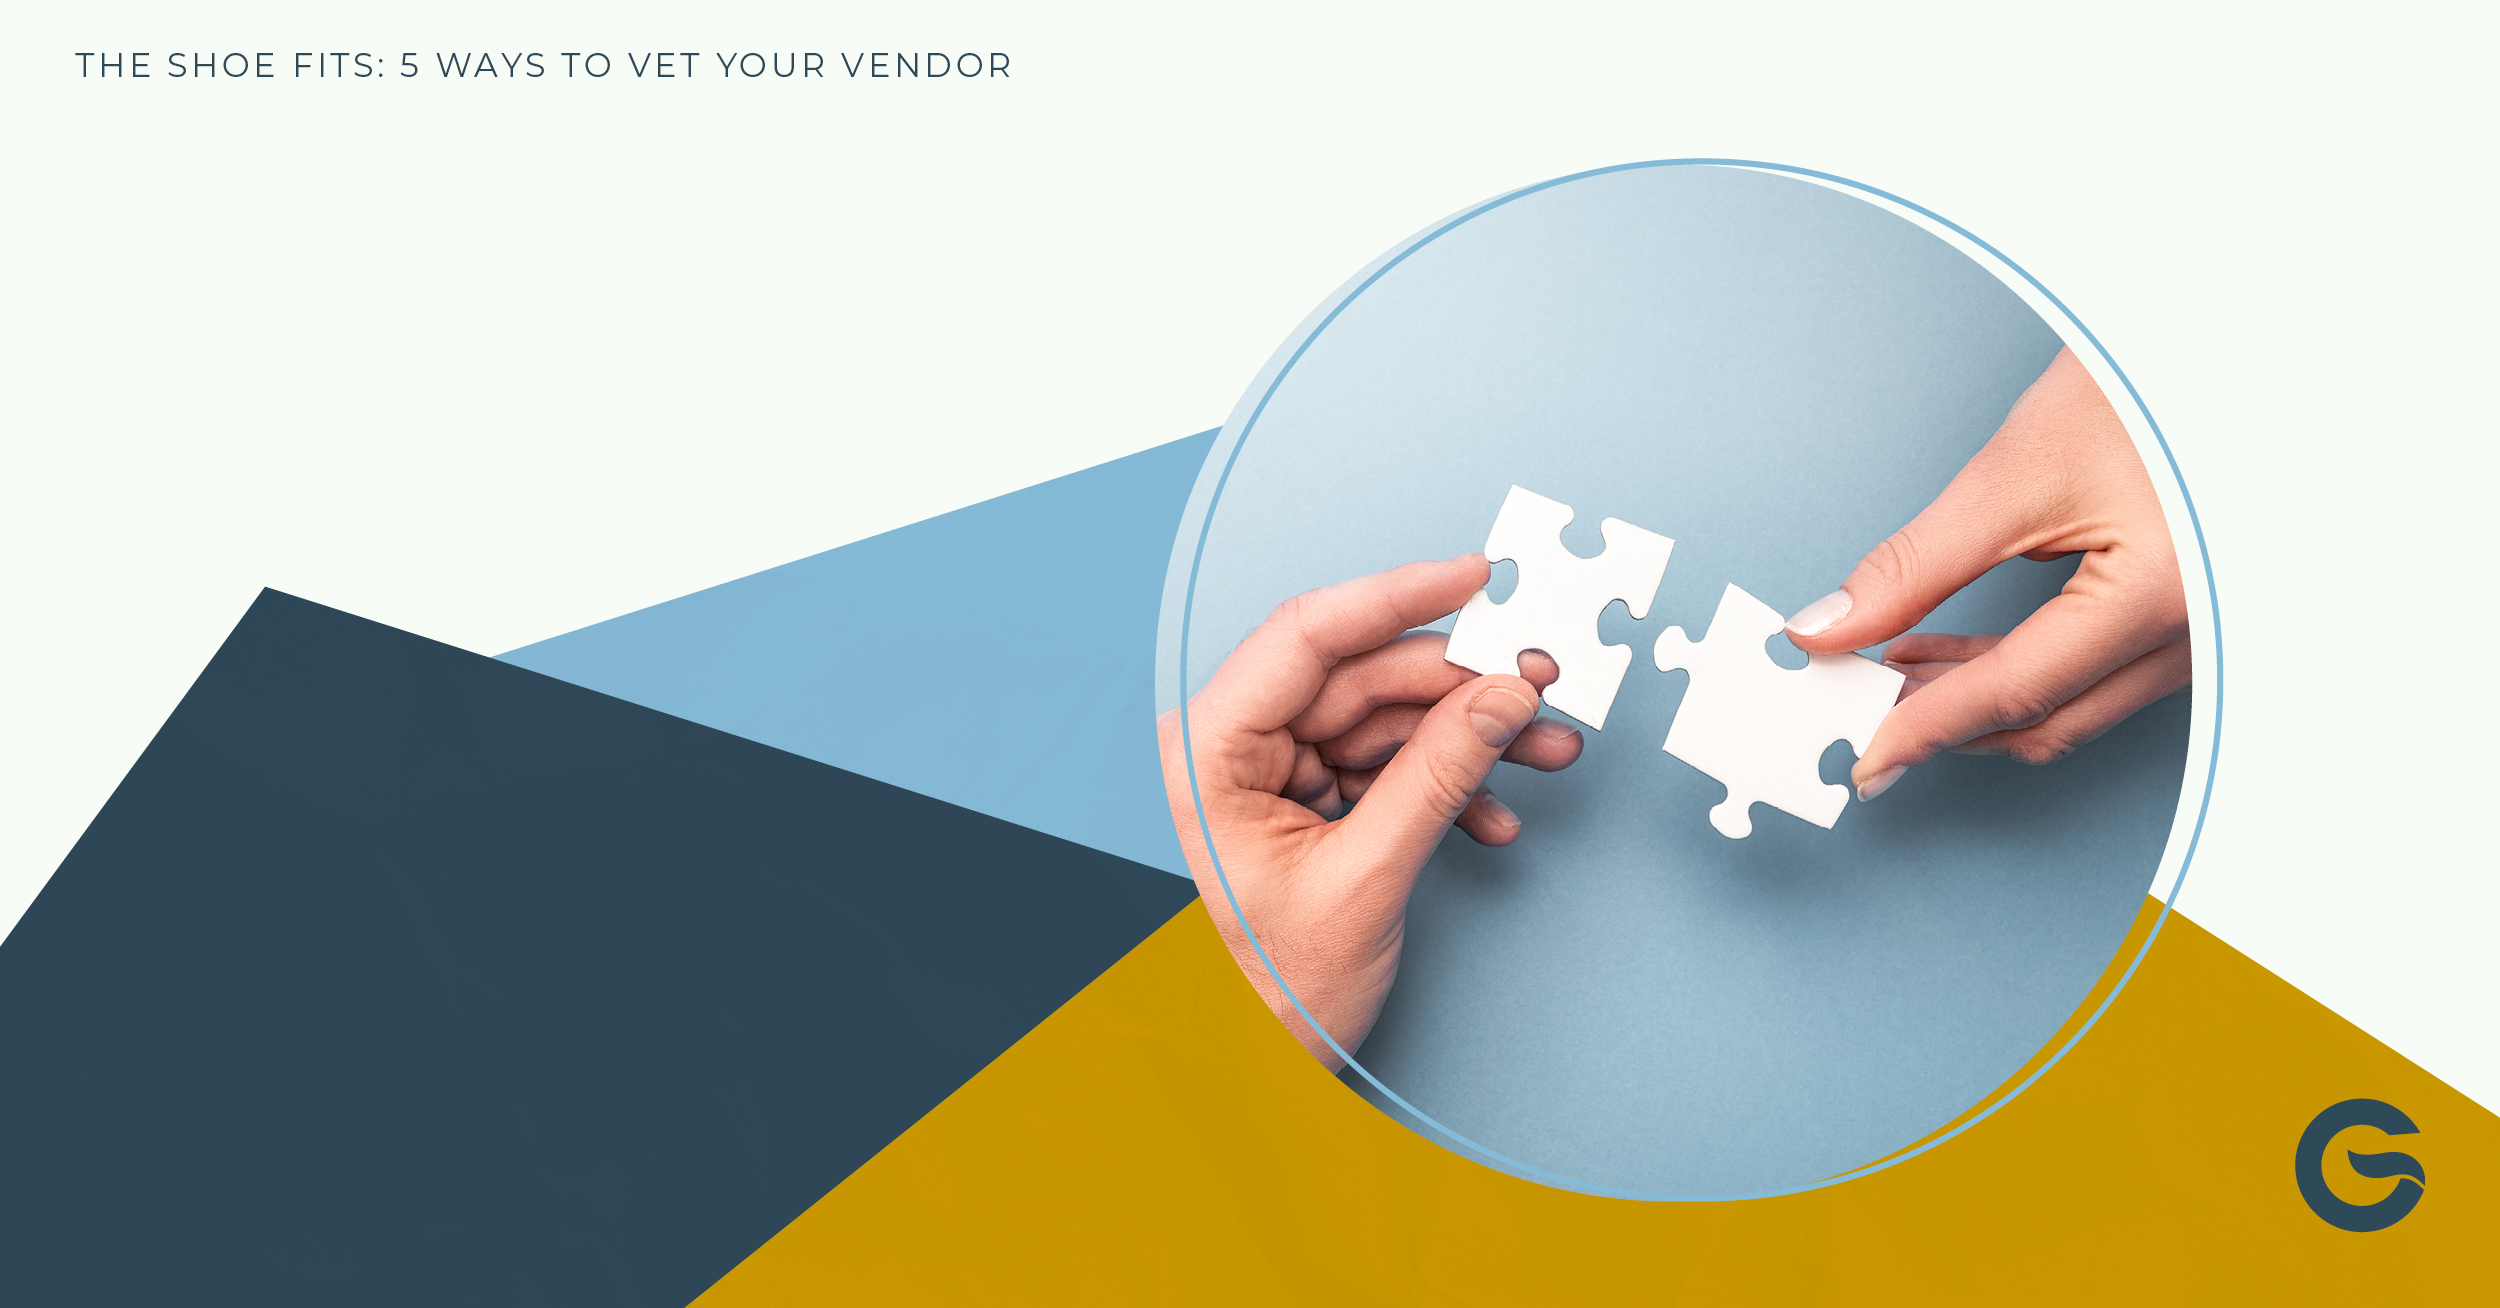 The Shoe Fits: 5 Ways to Vet Your Vendor Image